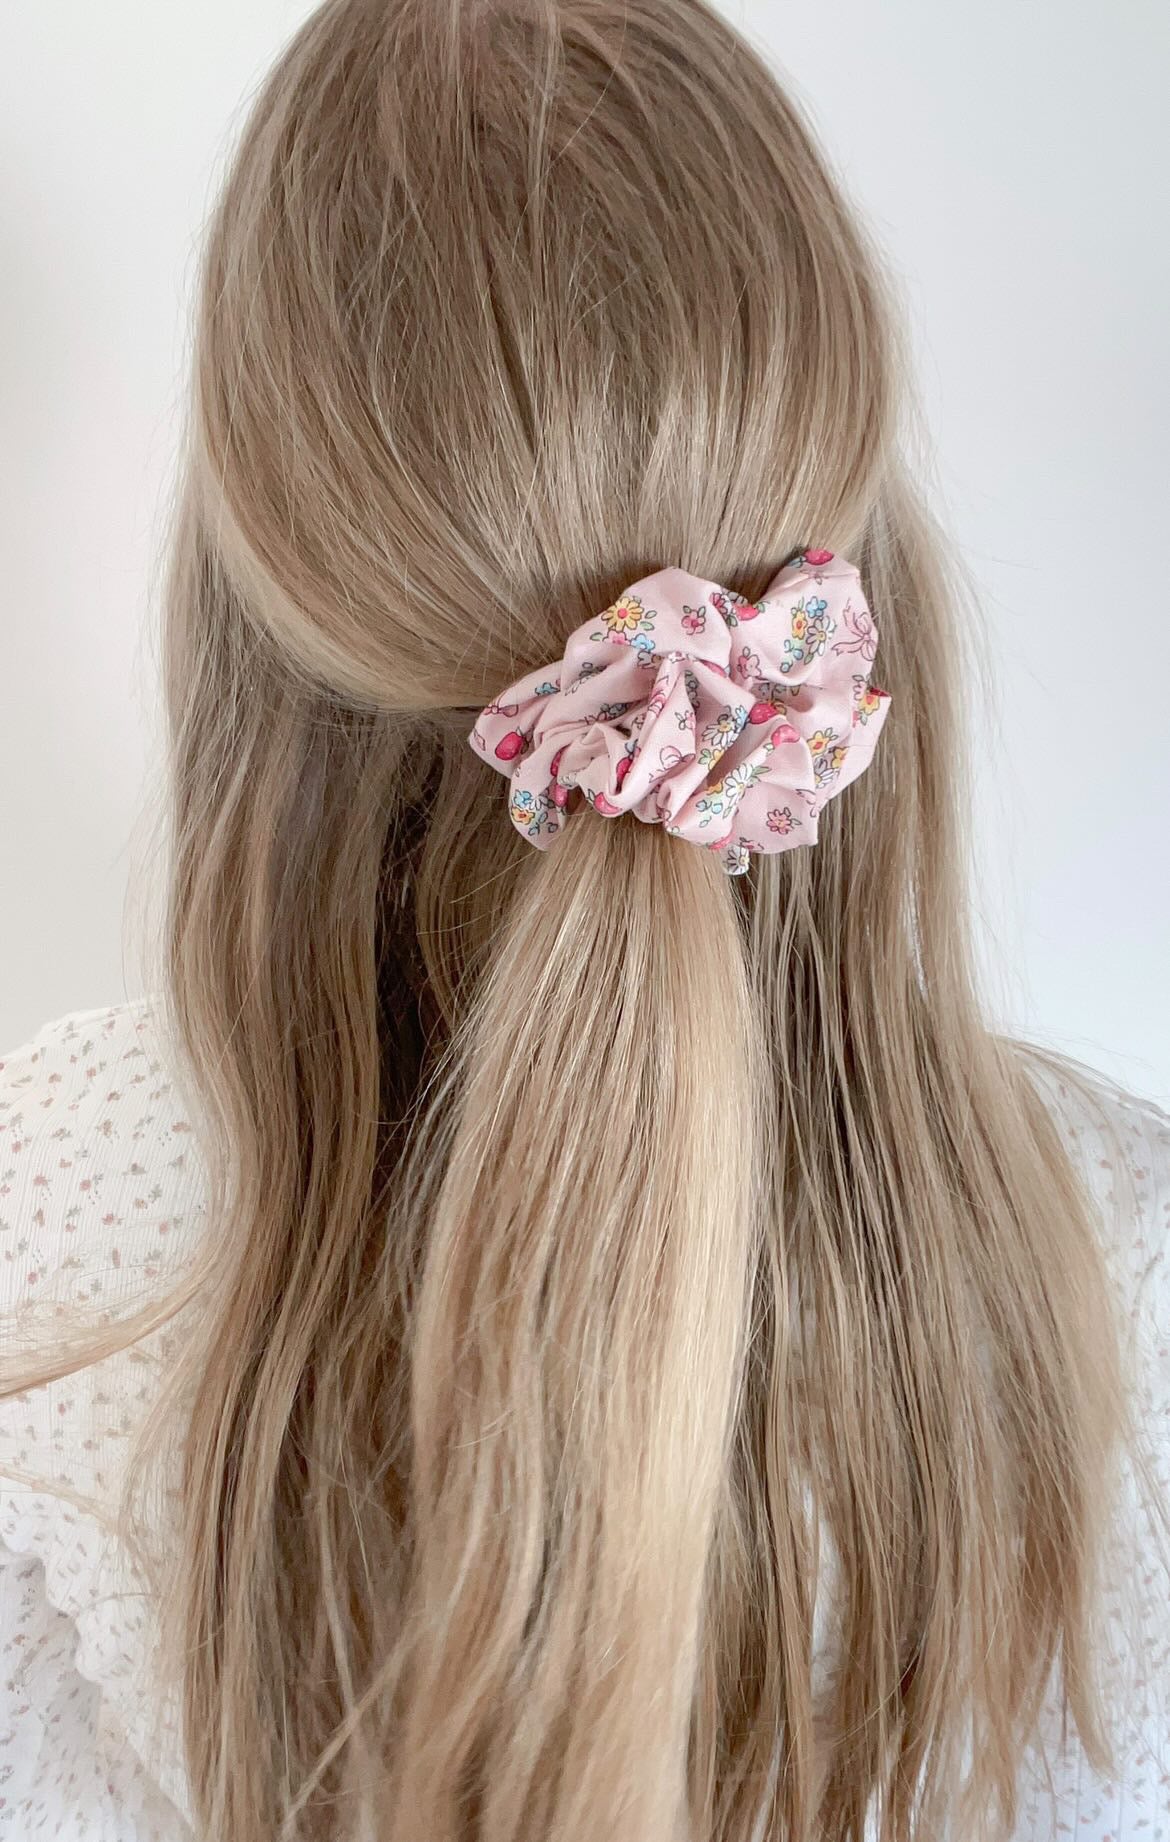 Scrunchie - Pink Bows & Flowers